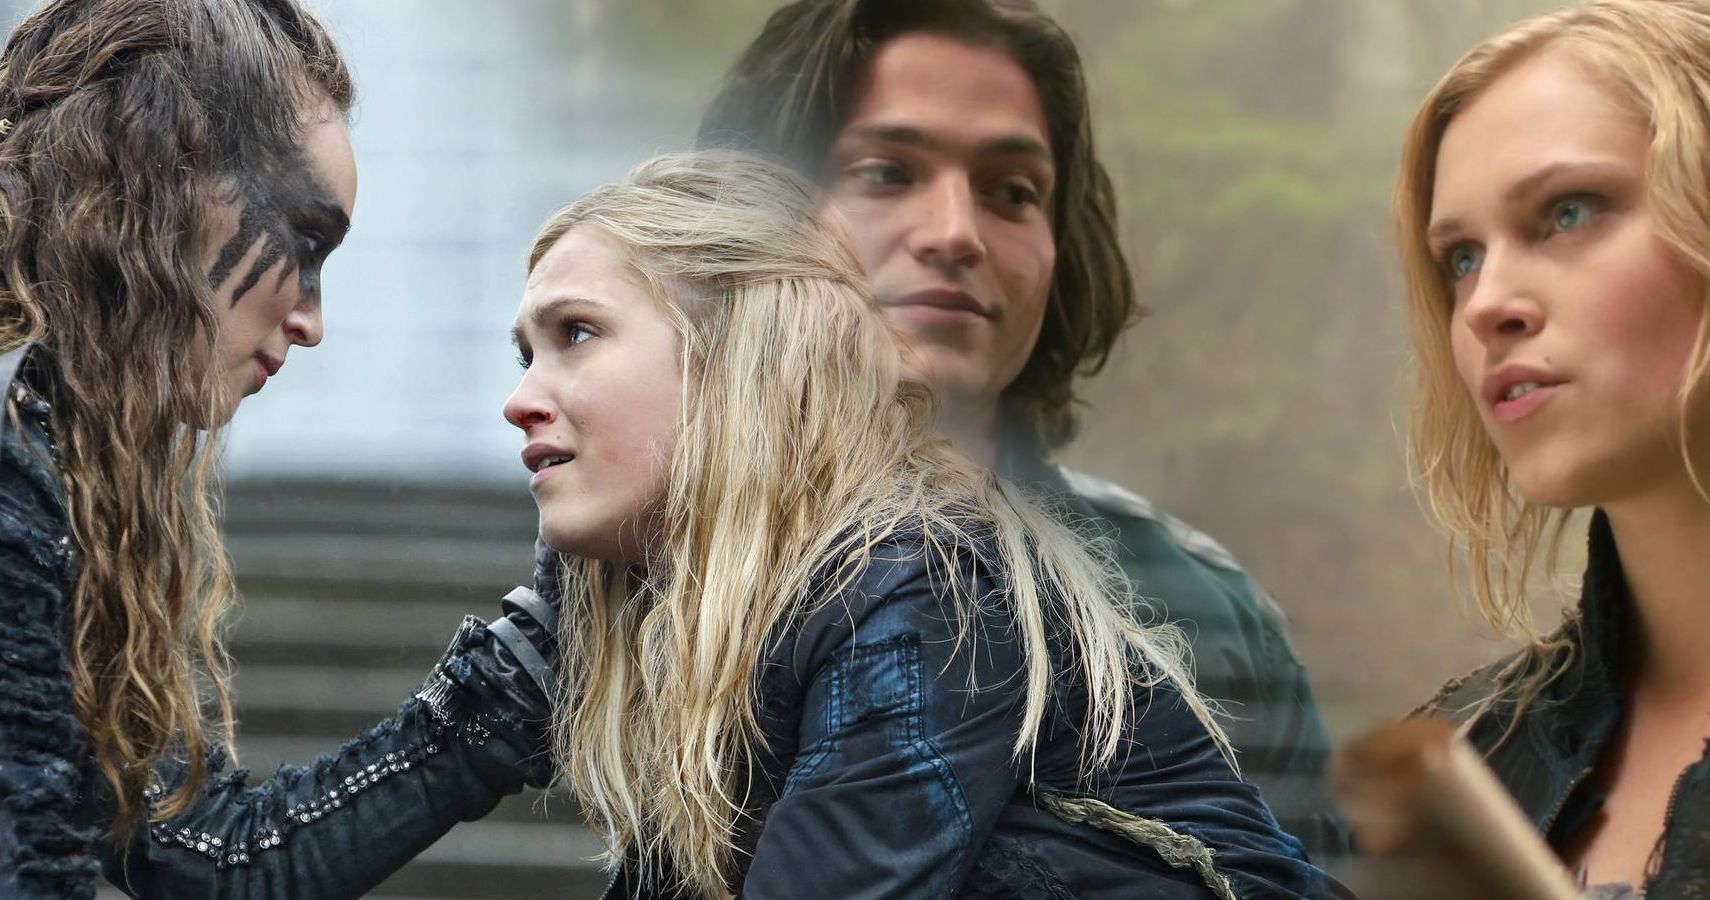 The 100 on X: They will always have each other. Stream the series